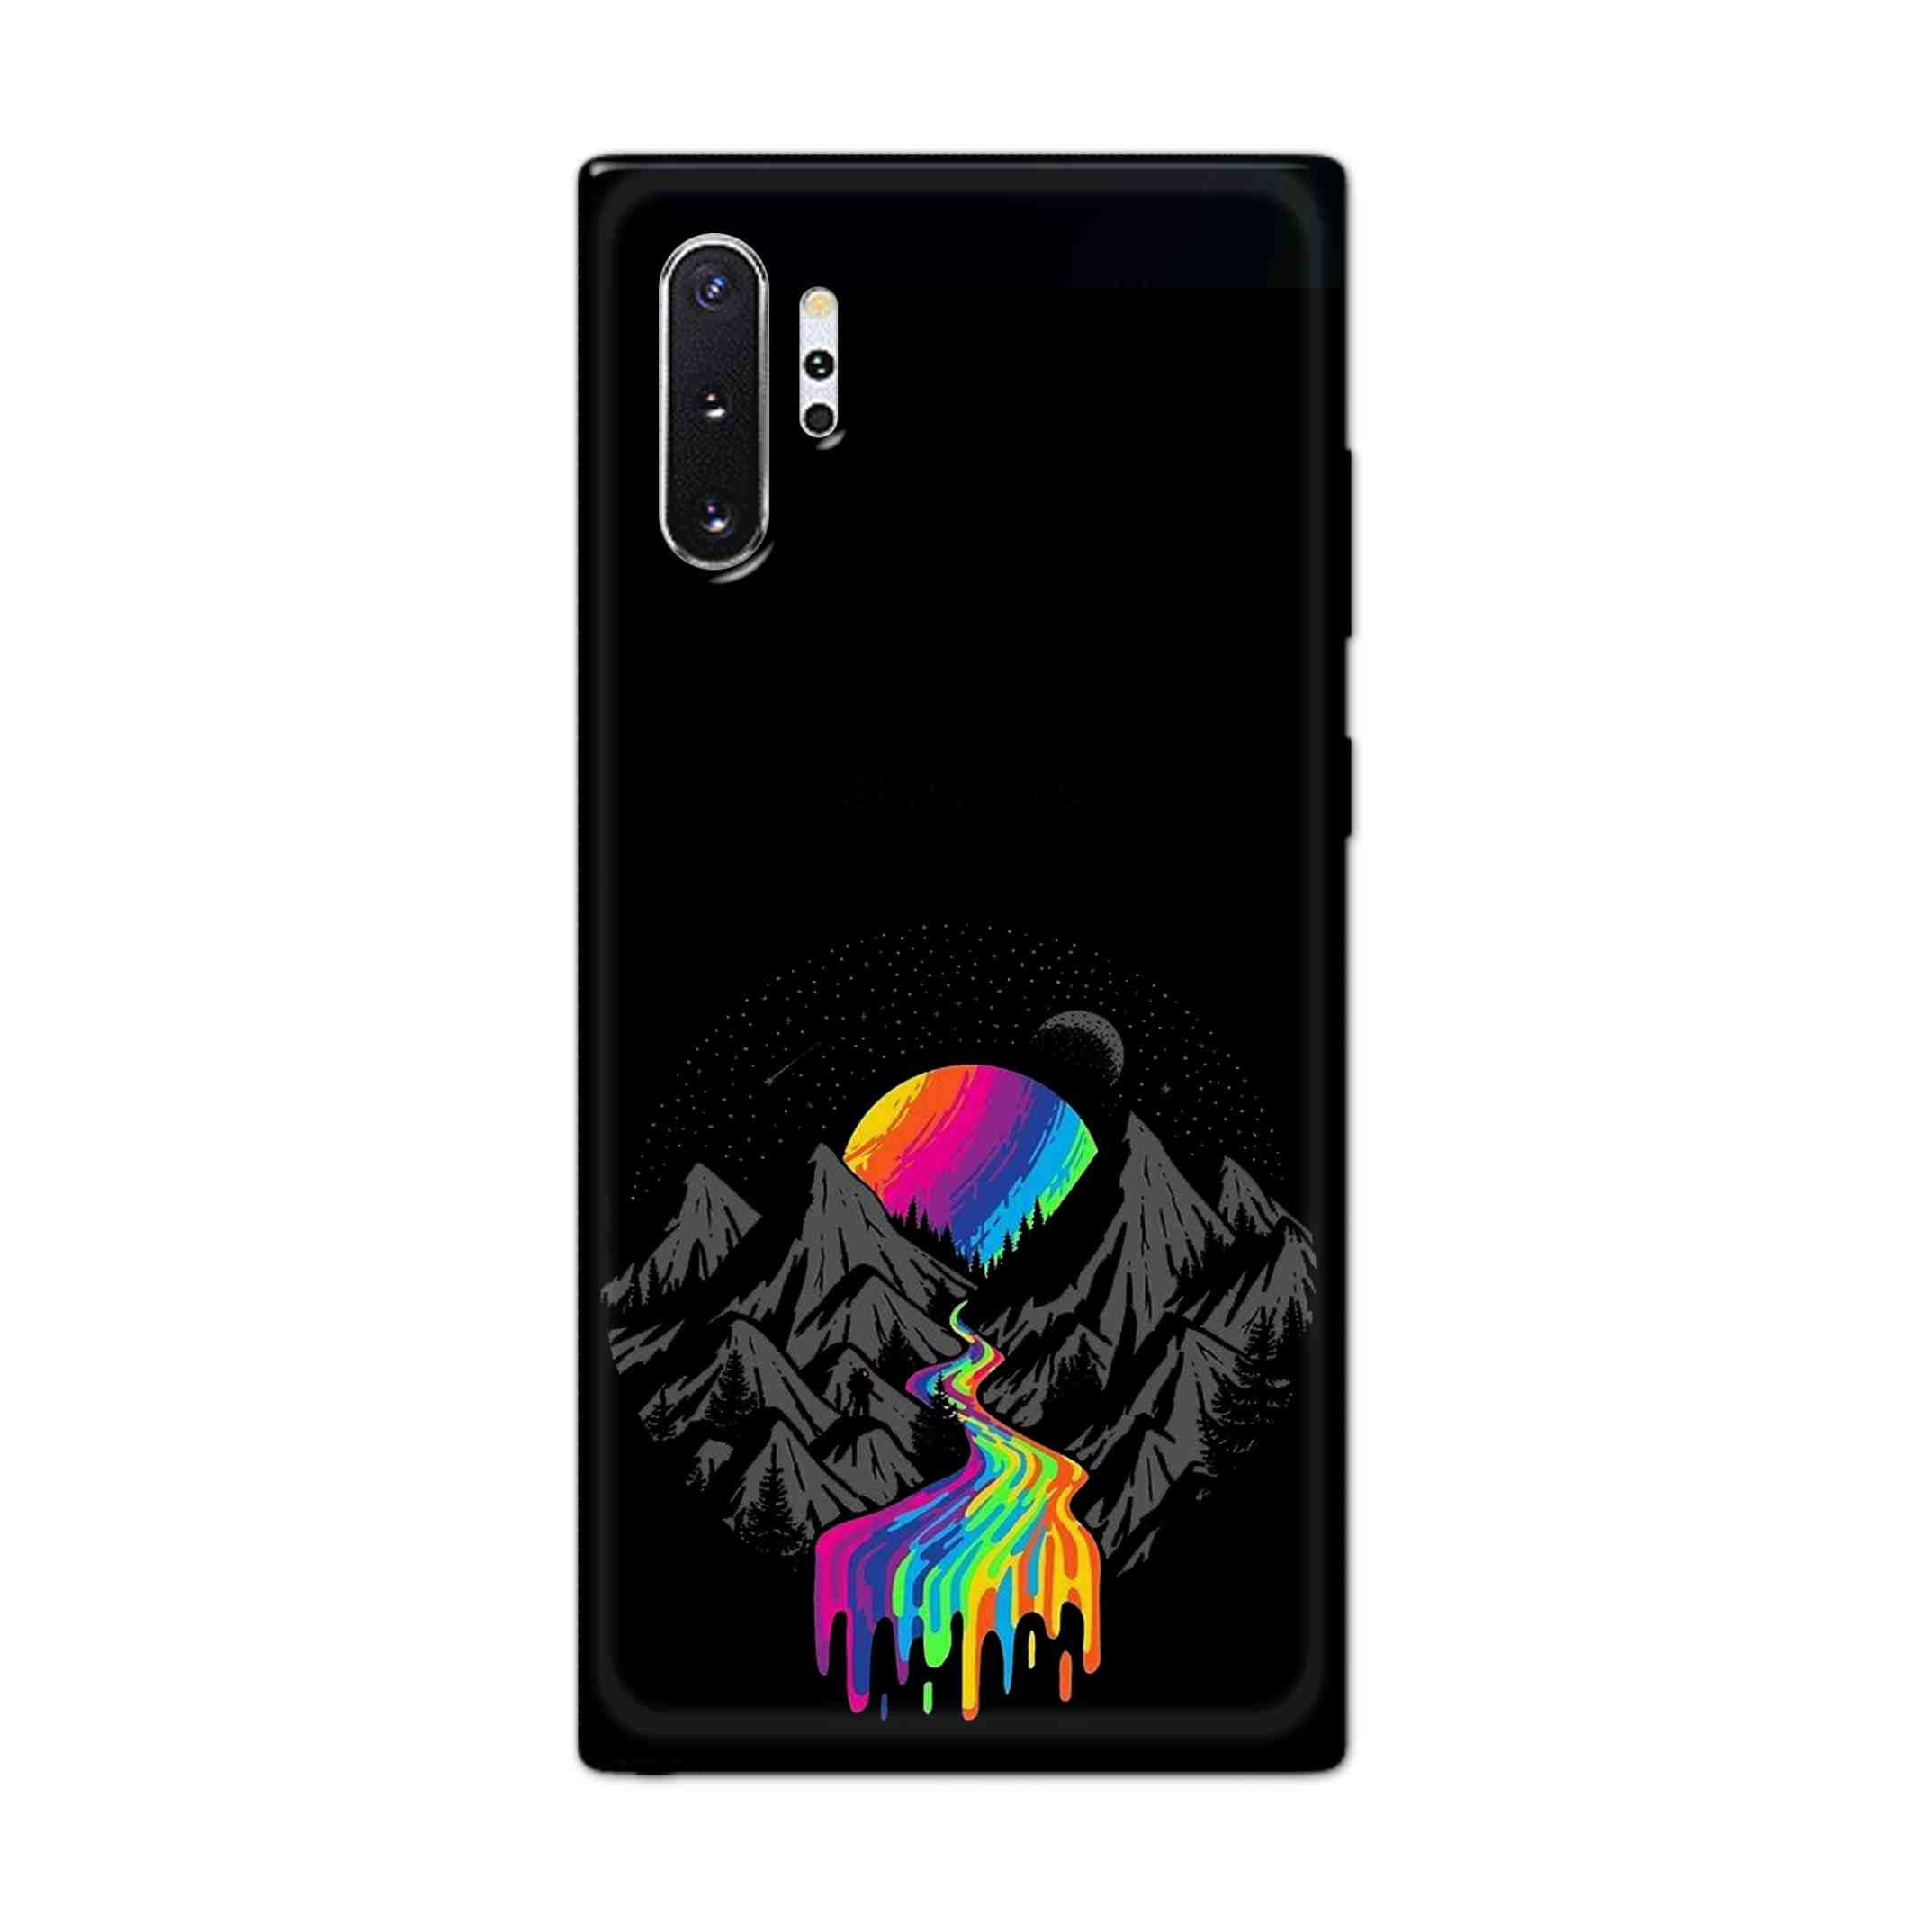 Buy Neon Mount Hard Back Mobile Phone Case Cover For Samsung Note 10 Plus (5G) Online